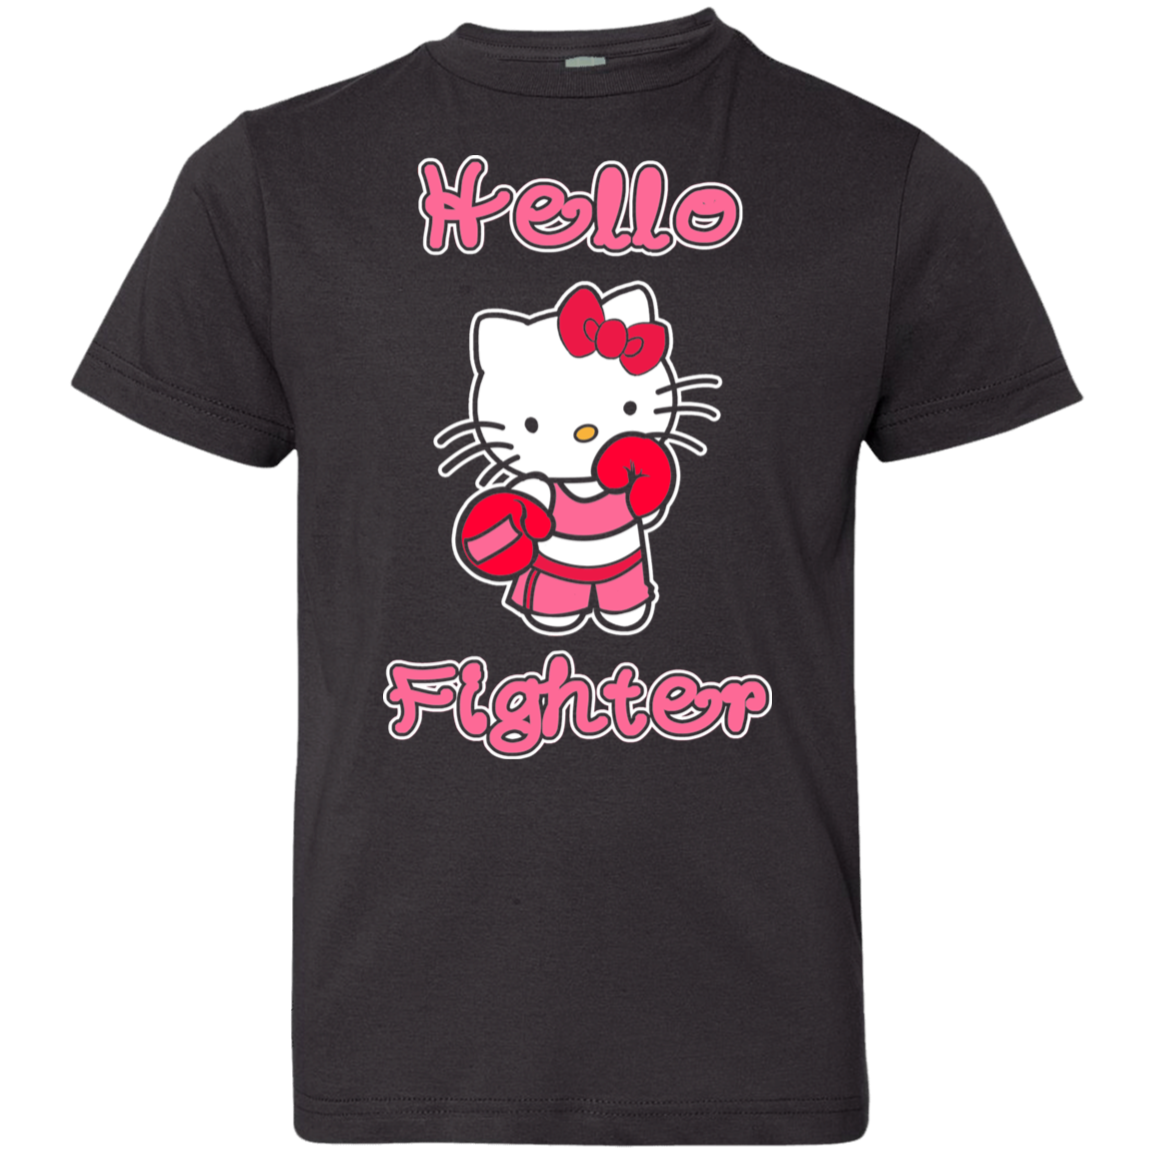 Artichoke Fight Gear Custom Design #11. Hello Fighter. Youth Jersey 100% Combed Ringspun Cotton T-Shirt